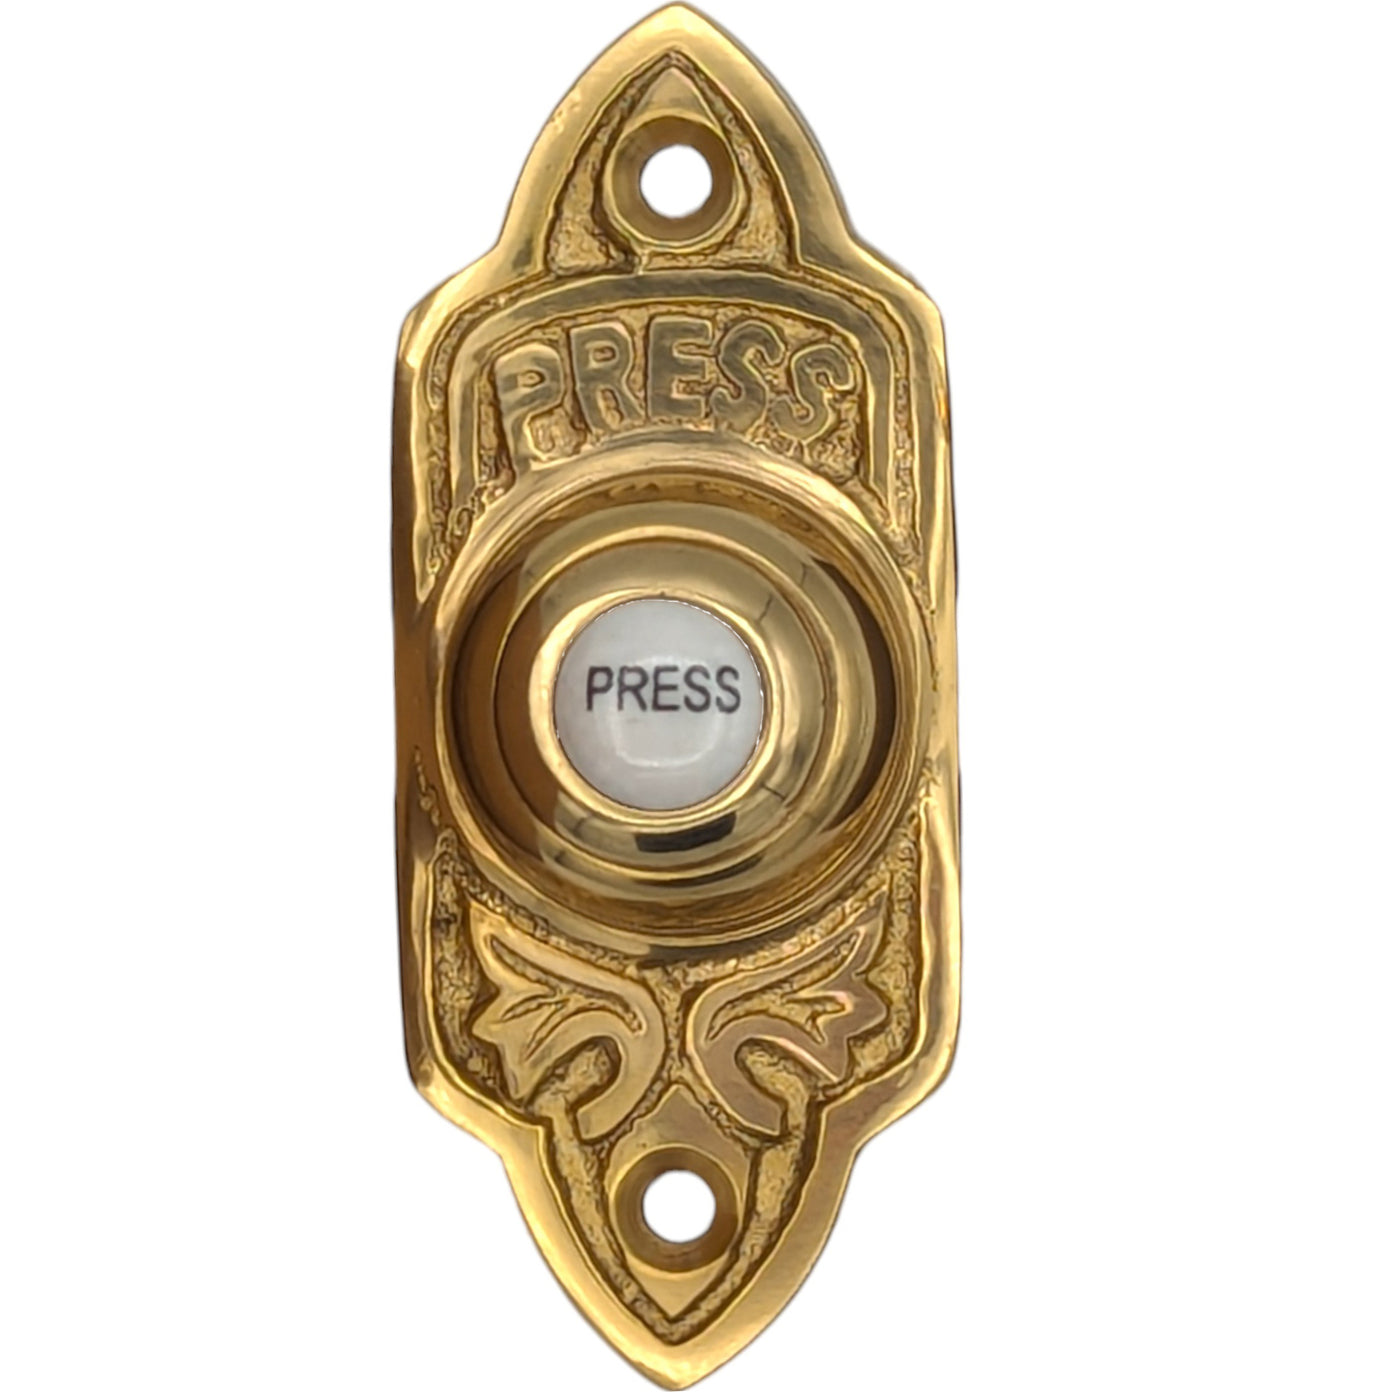 3 Inch Solid Brass Decorative Porcelain "Press" Doorbell Button (Several Finishes Available)